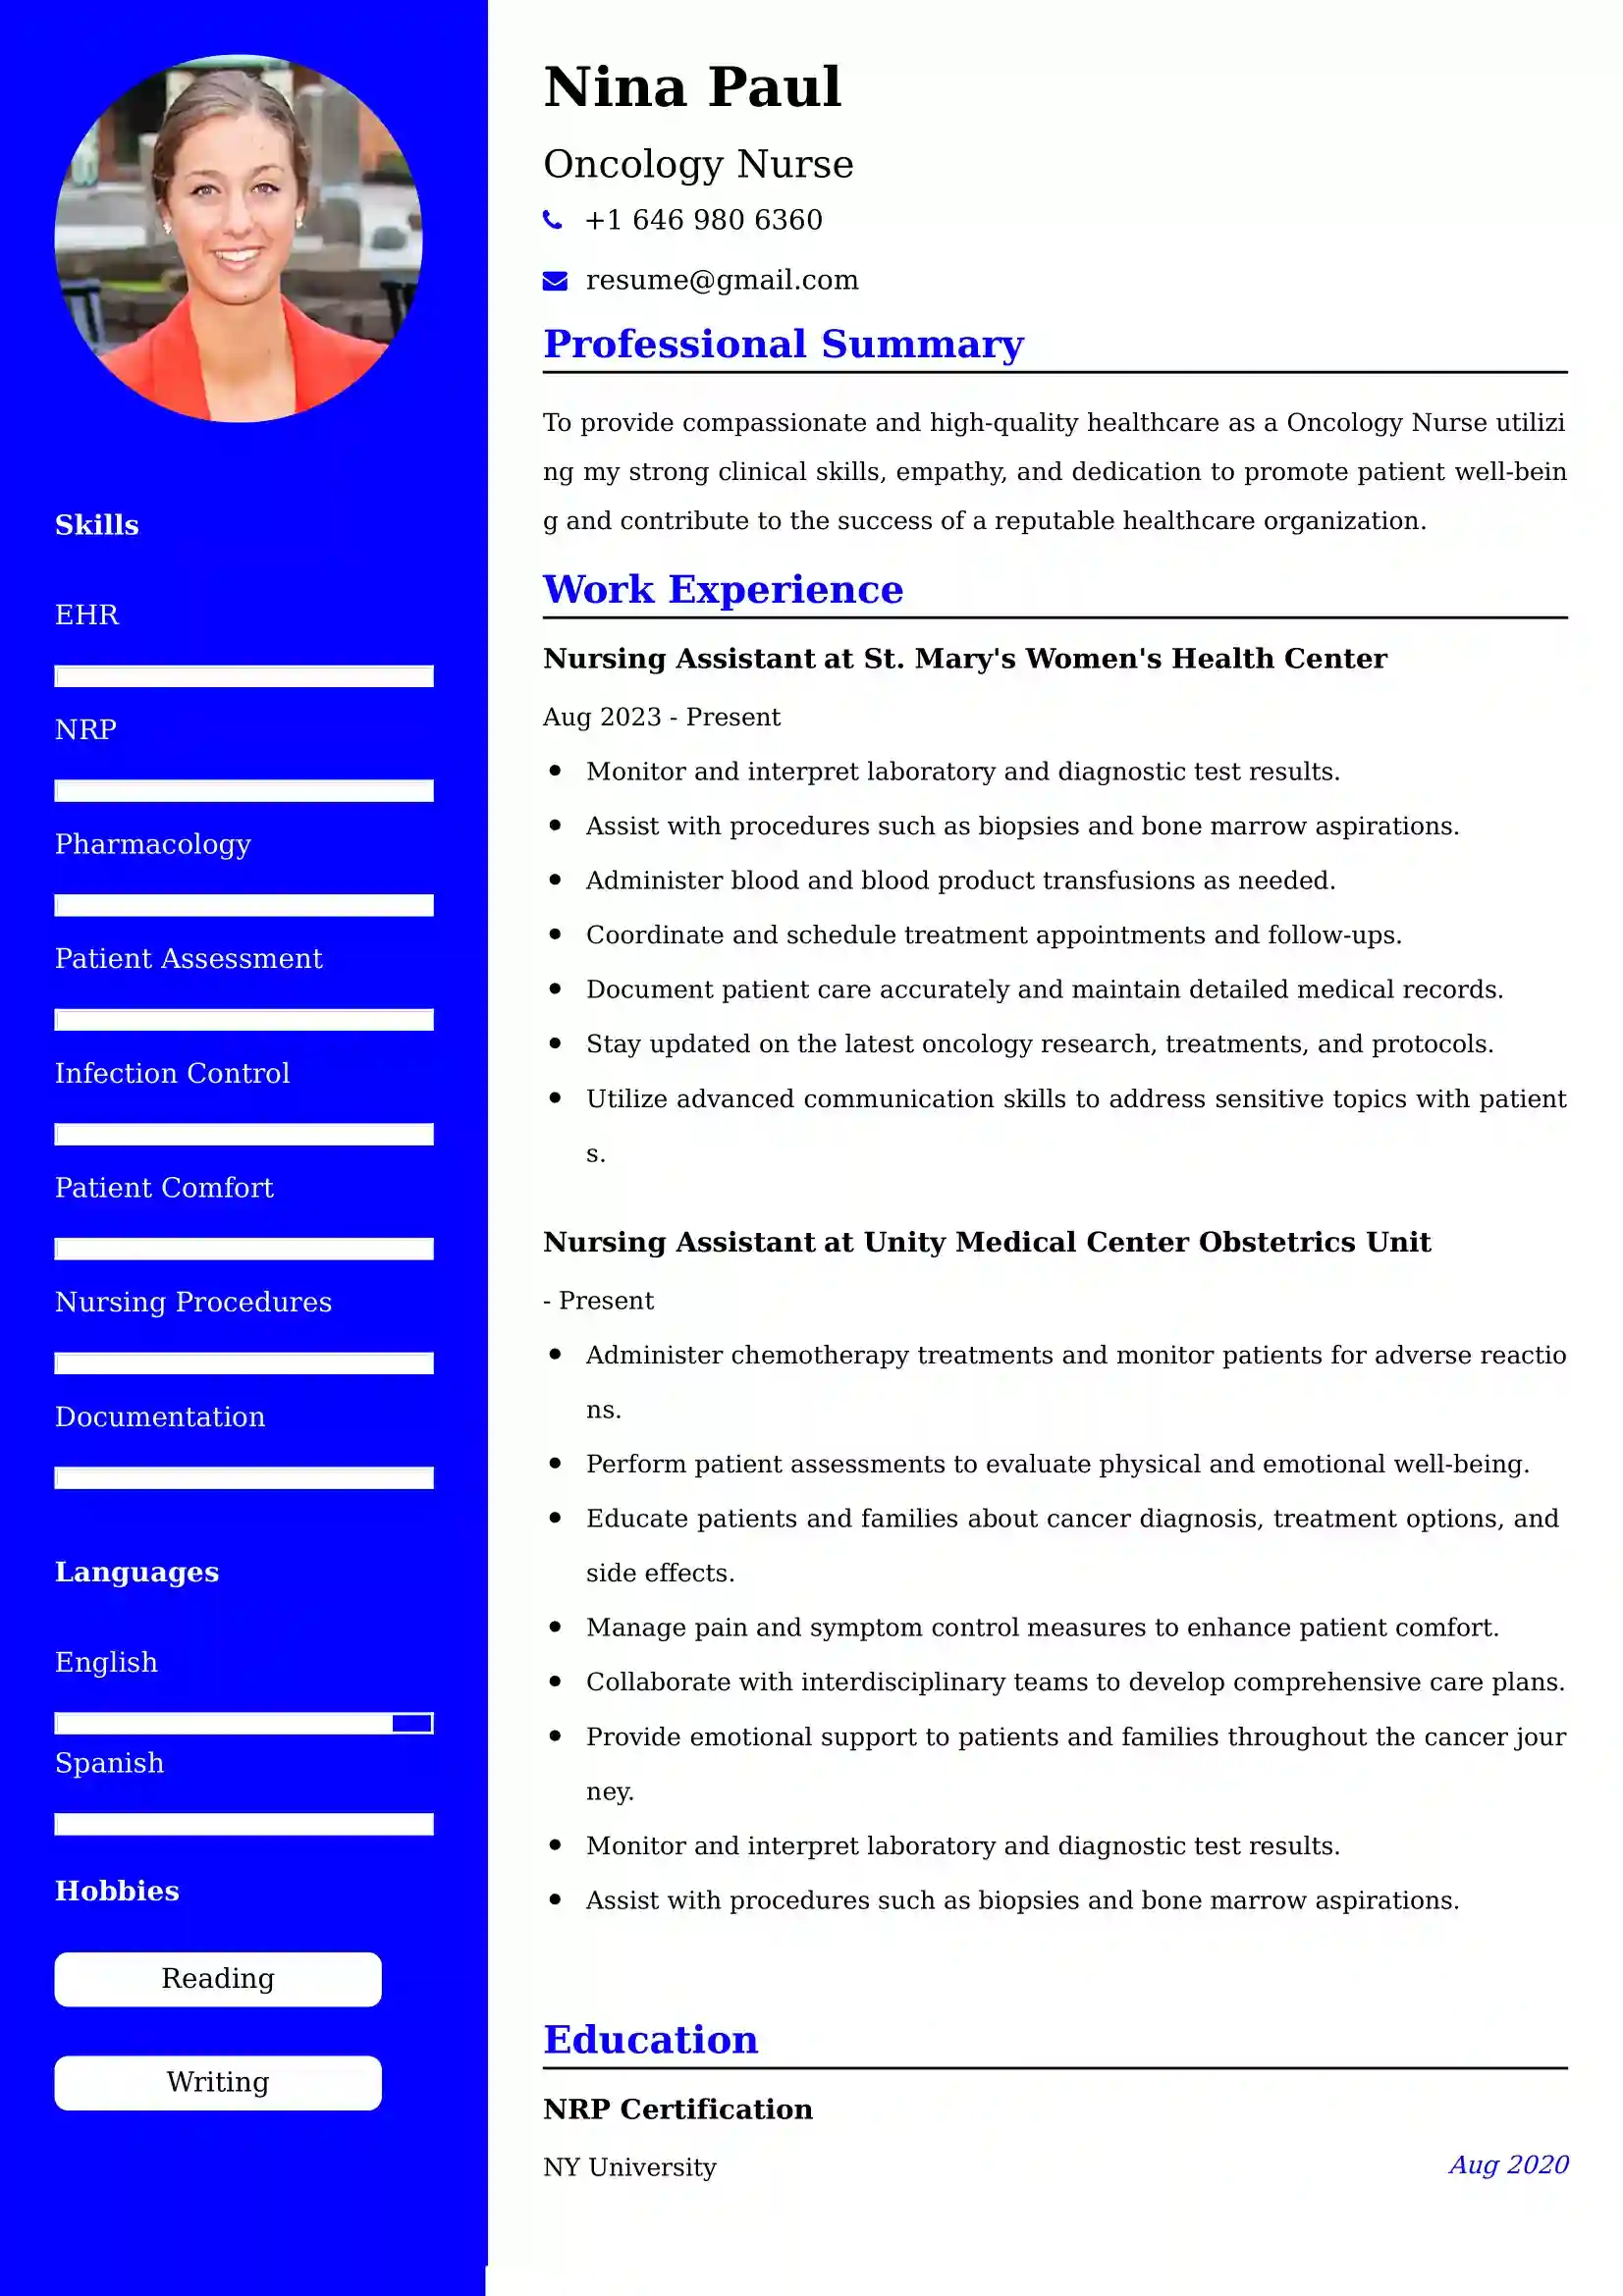 Oncology Nurse Resume Examples for UK Jobs - Tips and Guide